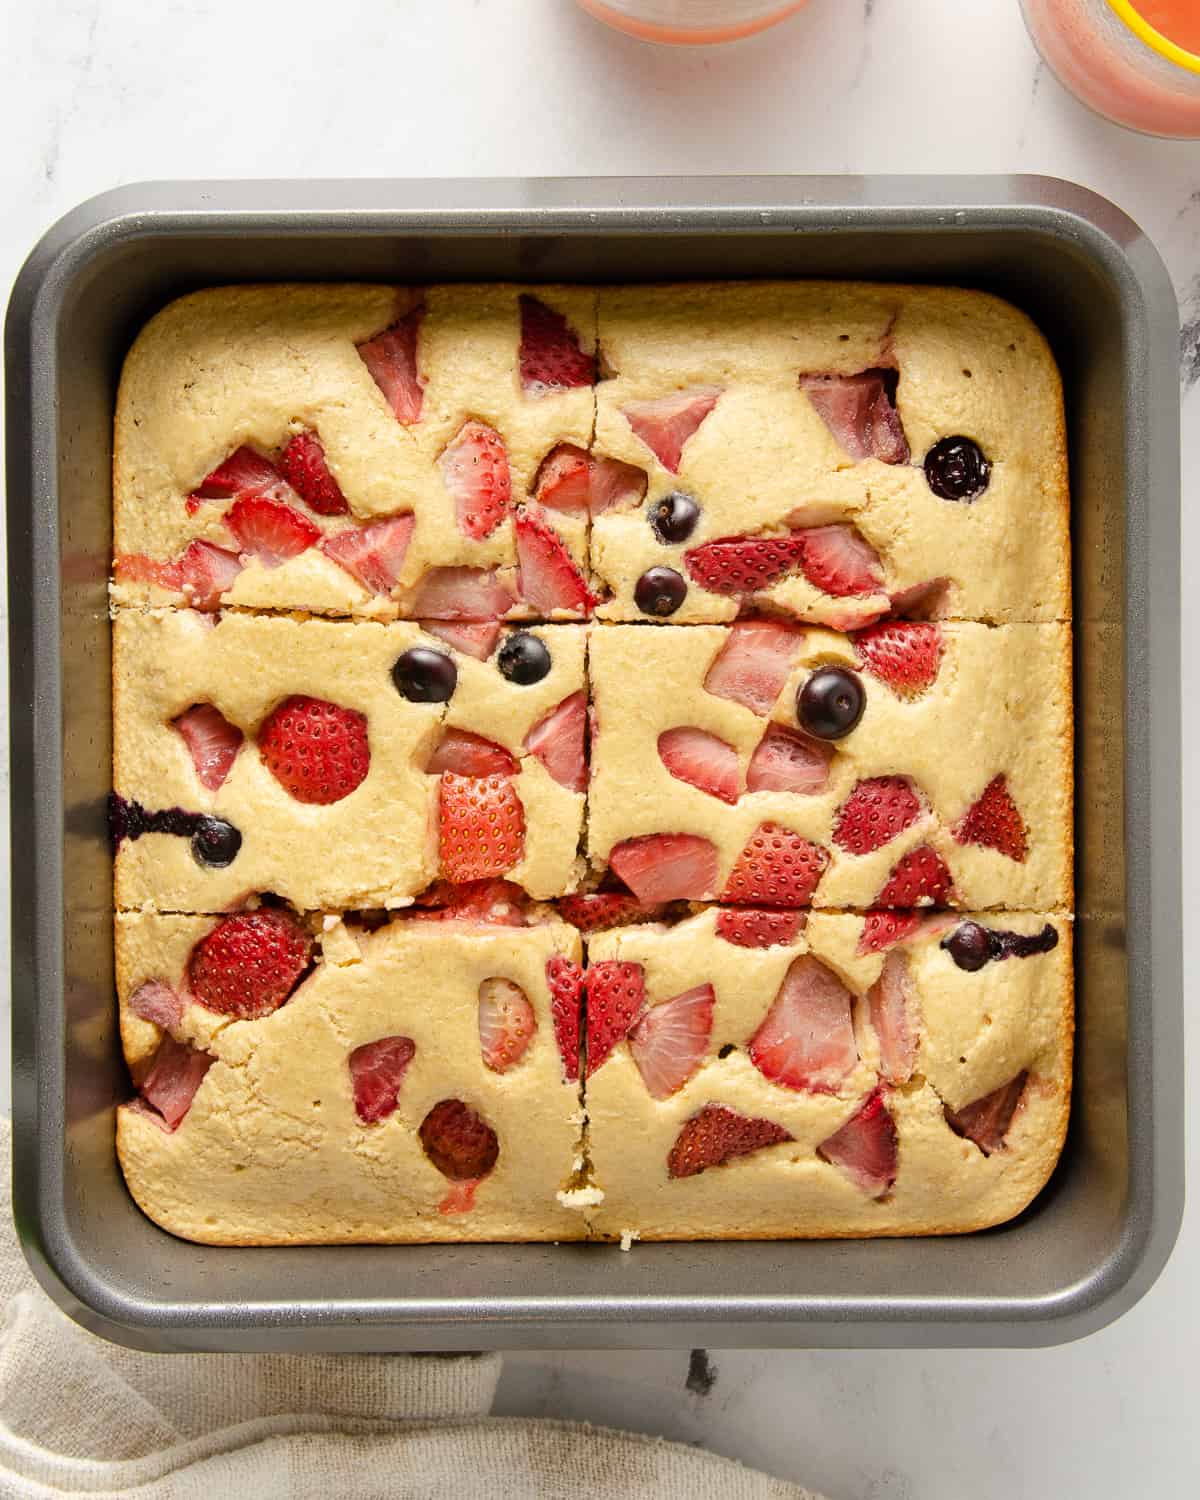 Protein baked oats in a baking dish with berries sliced into six pieces.